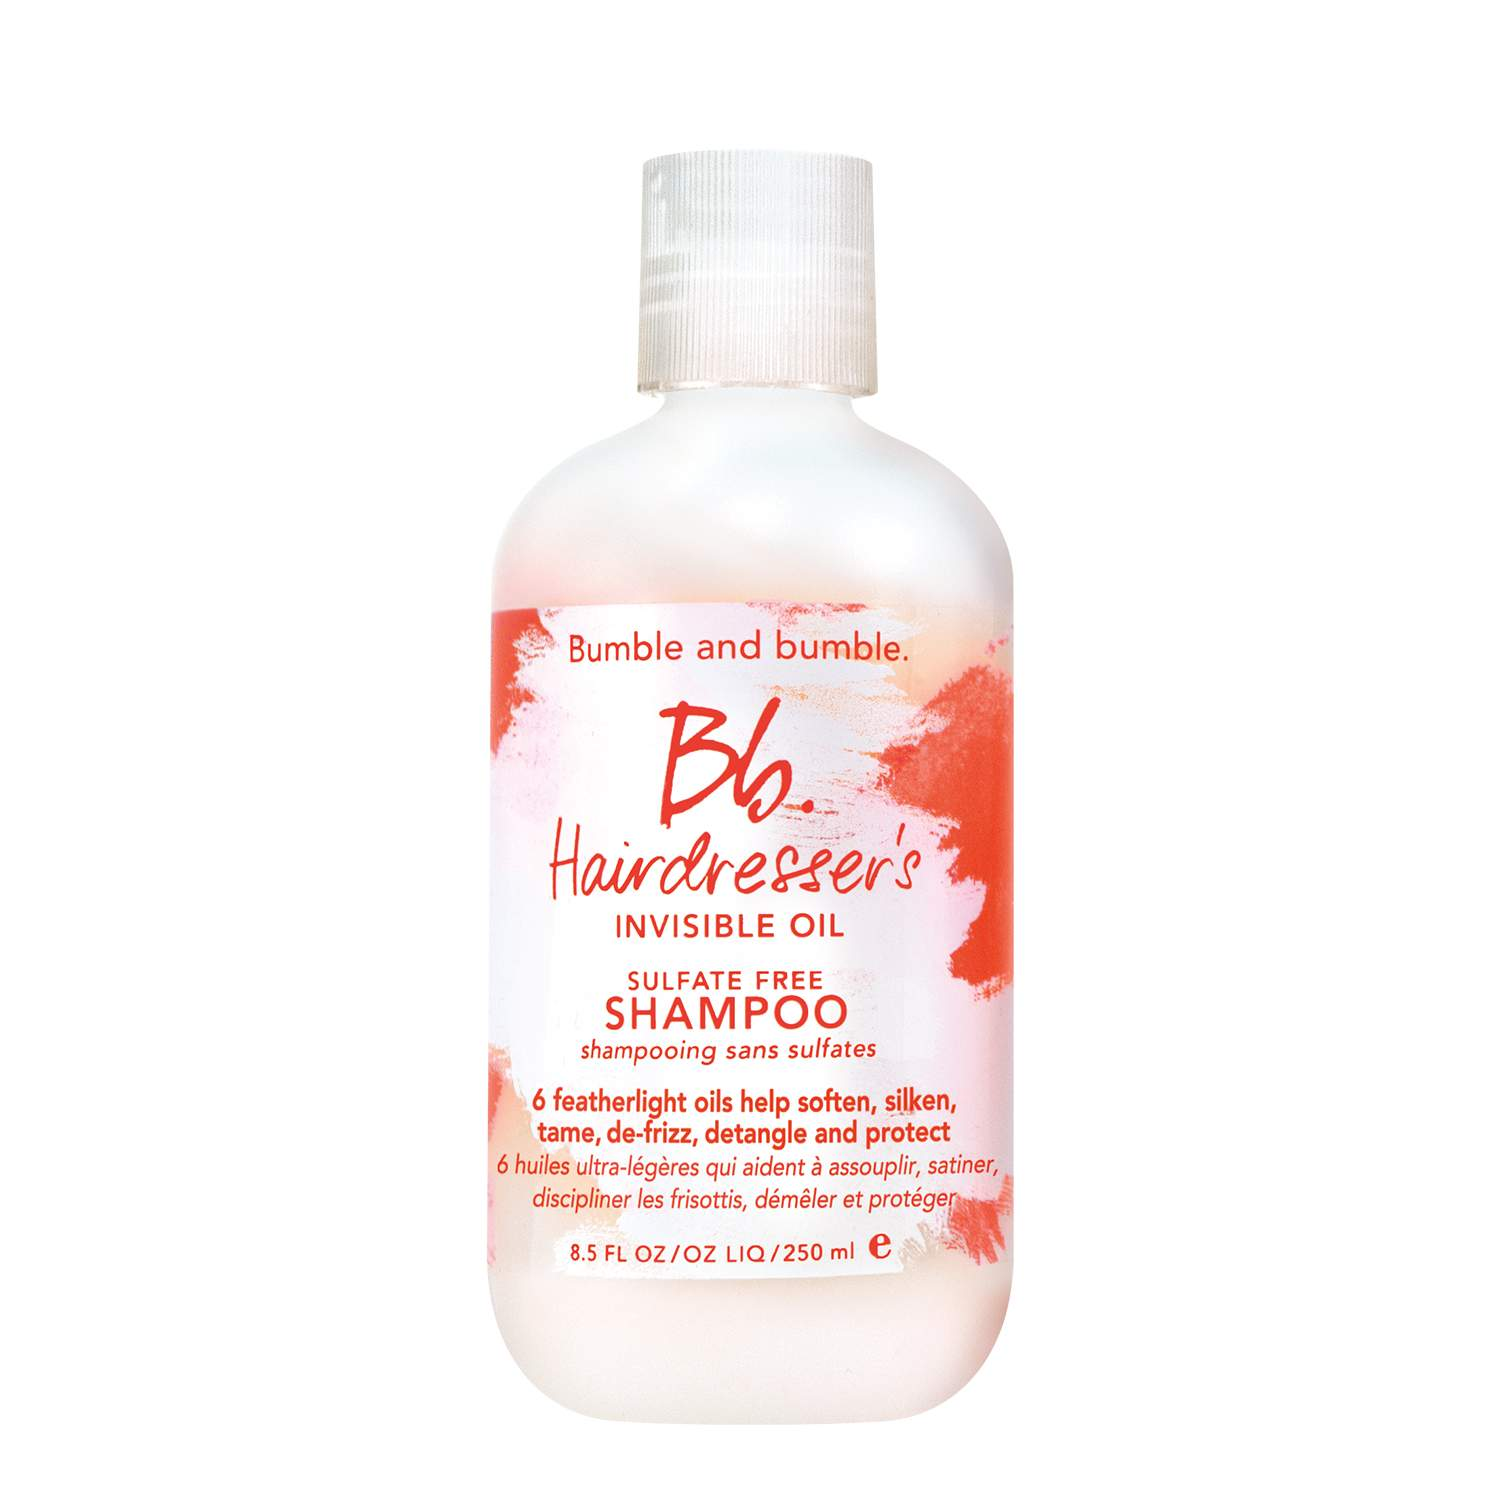 Bumble and bumble. Hairdresser's Invisible Oil Shampoo (250ml) Bumble and bumble. Hairdresser's Invisible Oil Shampoo (250ml) 1